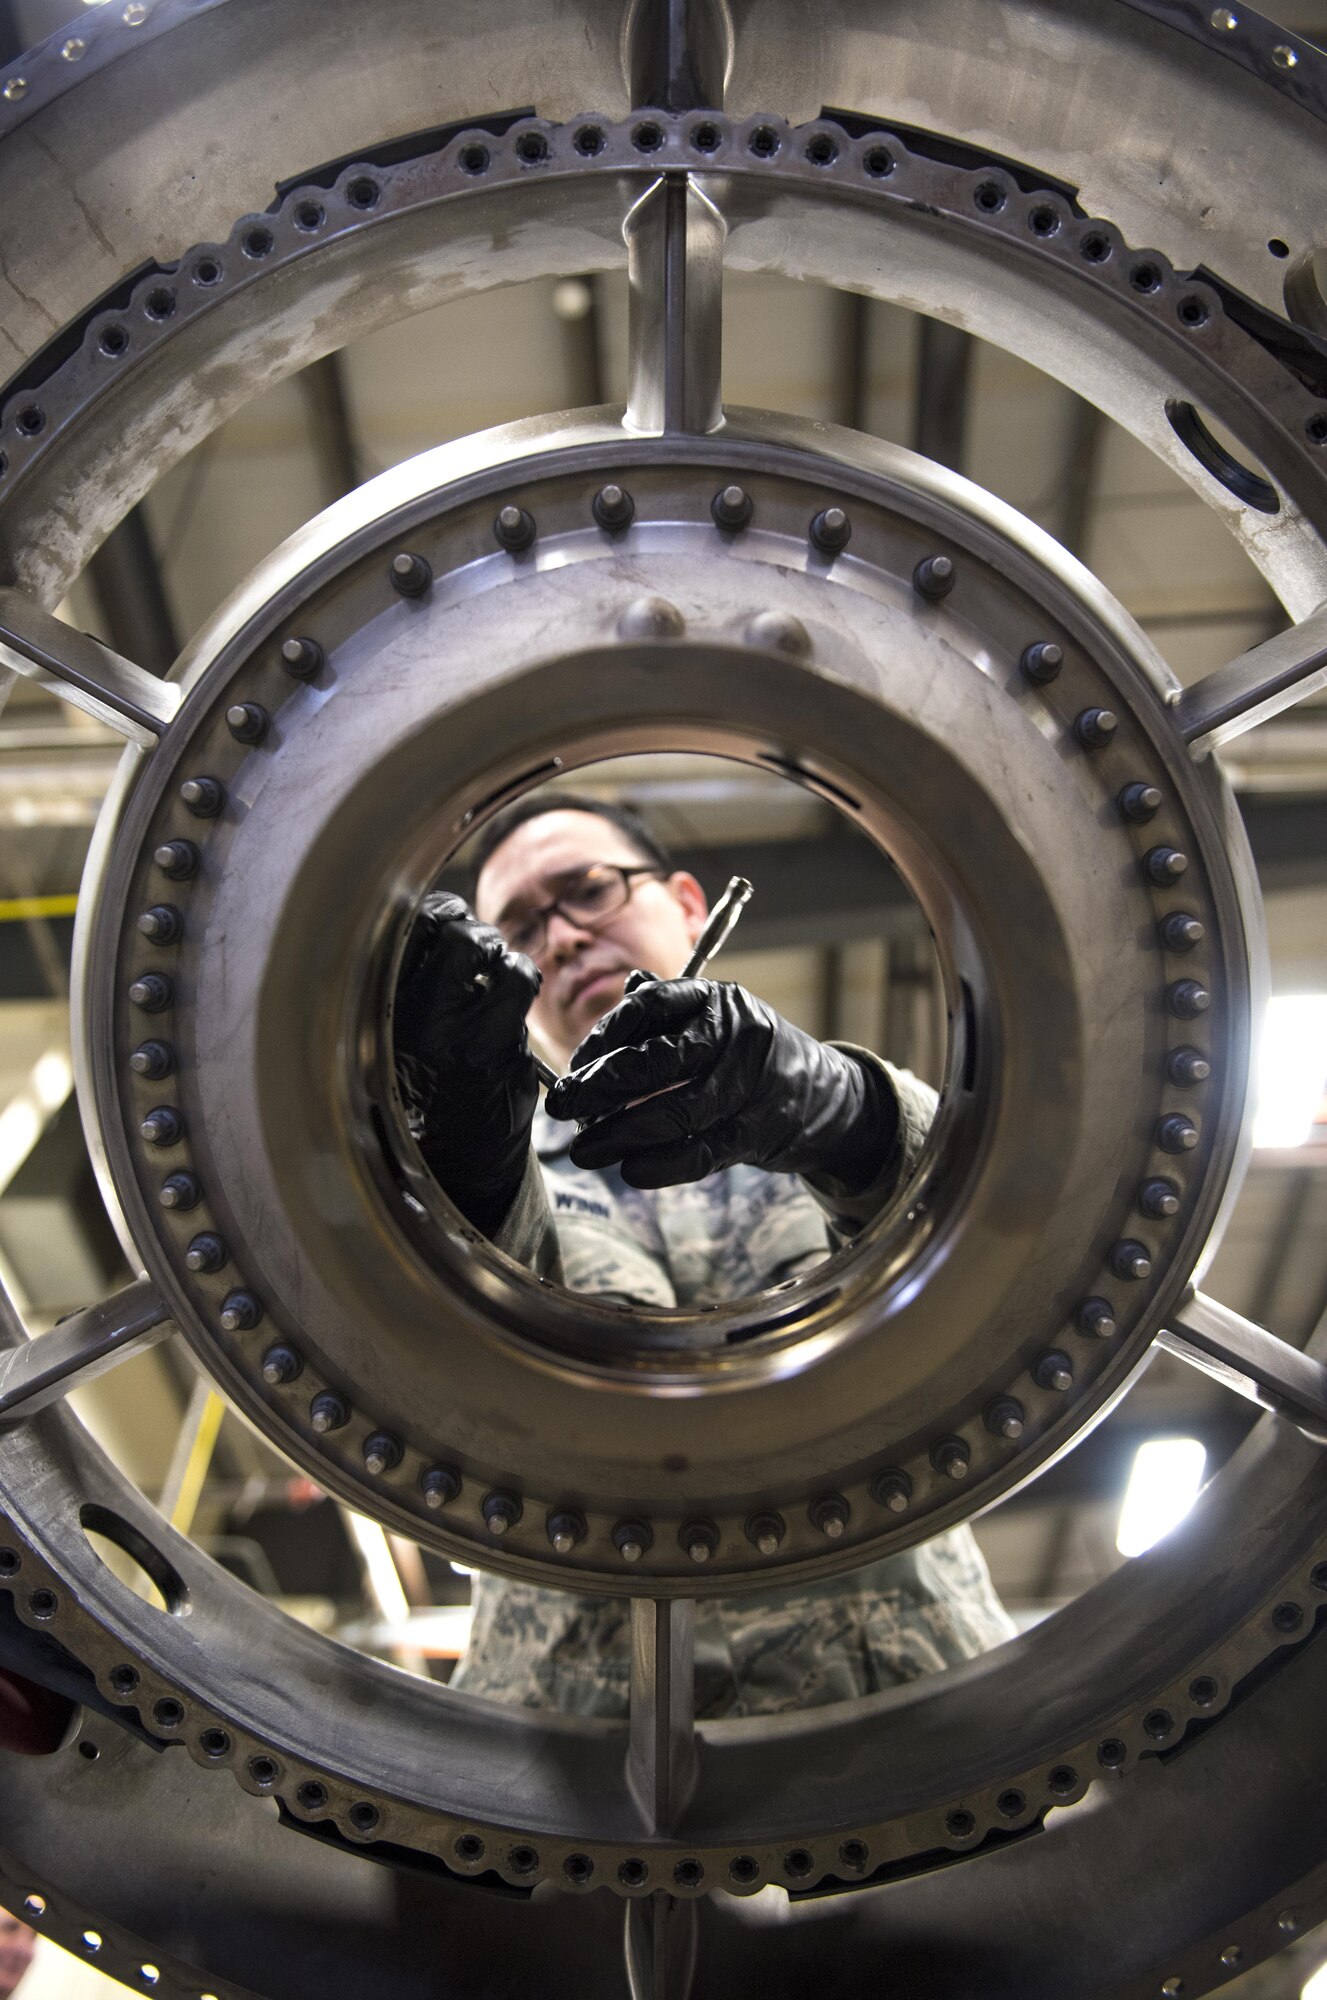 Staff Sgt. James Winn, 113th Maintenance Squadron aerospace propulsion technician, performs phase maintenance on the fan frame of an F-16 Fighting Falcon engine at Joint Base Andrews, Md., March 27, 2017. The F-16 must go through different inspections to ensure the quality and safety of the aircraft for mission readiness. In this case, the aerospace propulsion technicians are responsible for the tear down, inspection and build-up of F-16 engines after 4,000 flight hours. (U.S. Air Force photo by Airman 1st Class Gabrielle Spalding)